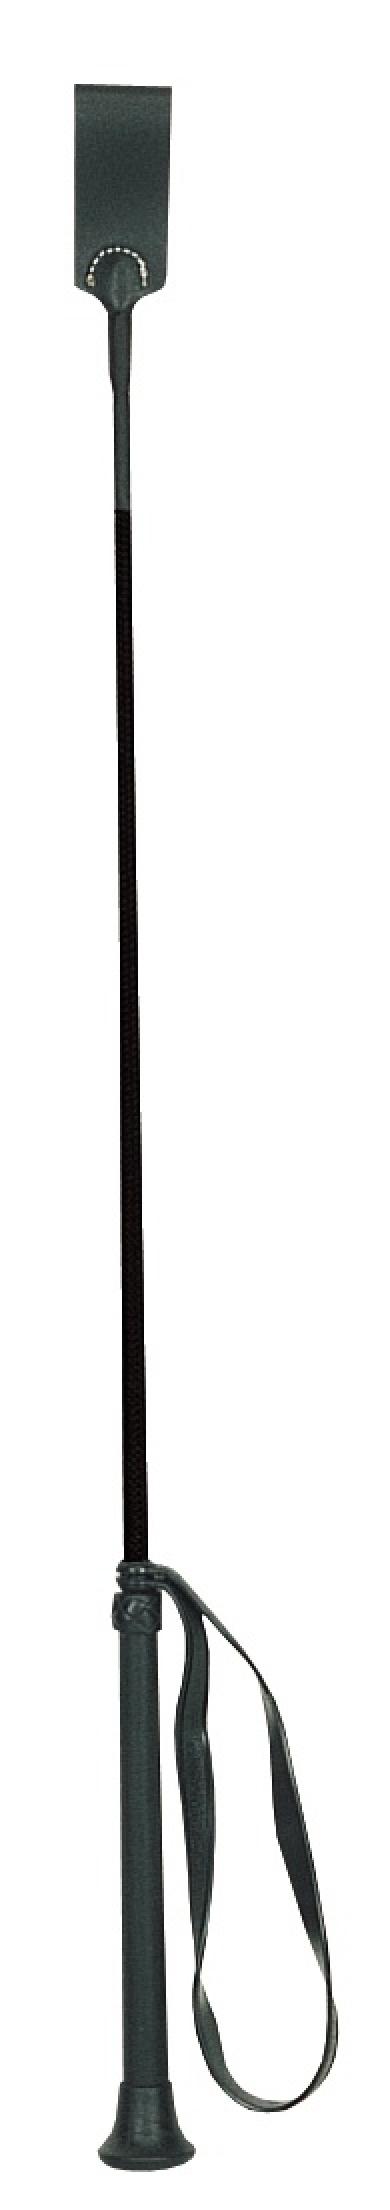 Riding Crop with PVC Handle, 24"